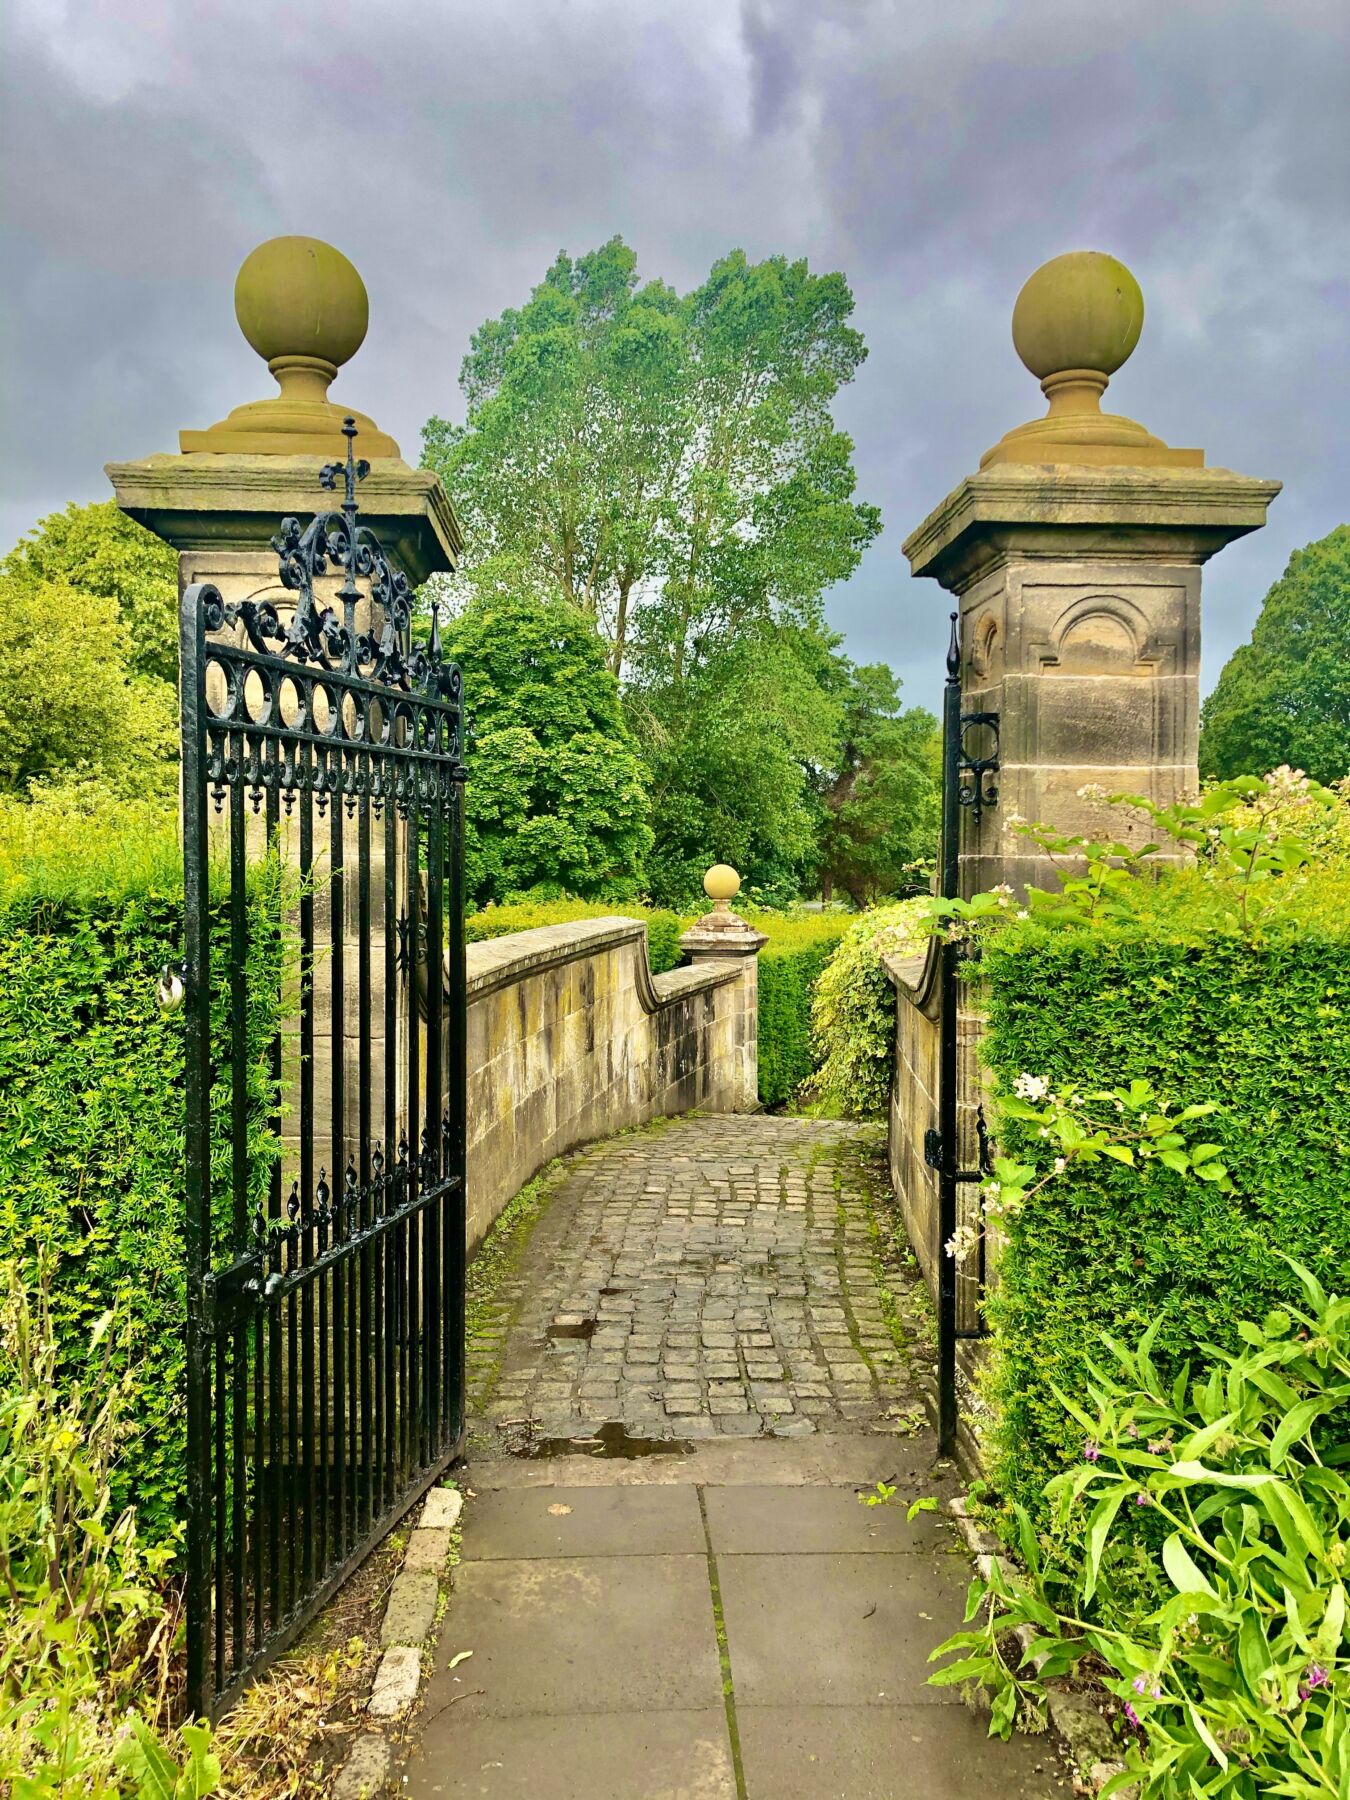 This is an image of an automatic gate in front of a driveway residential home,